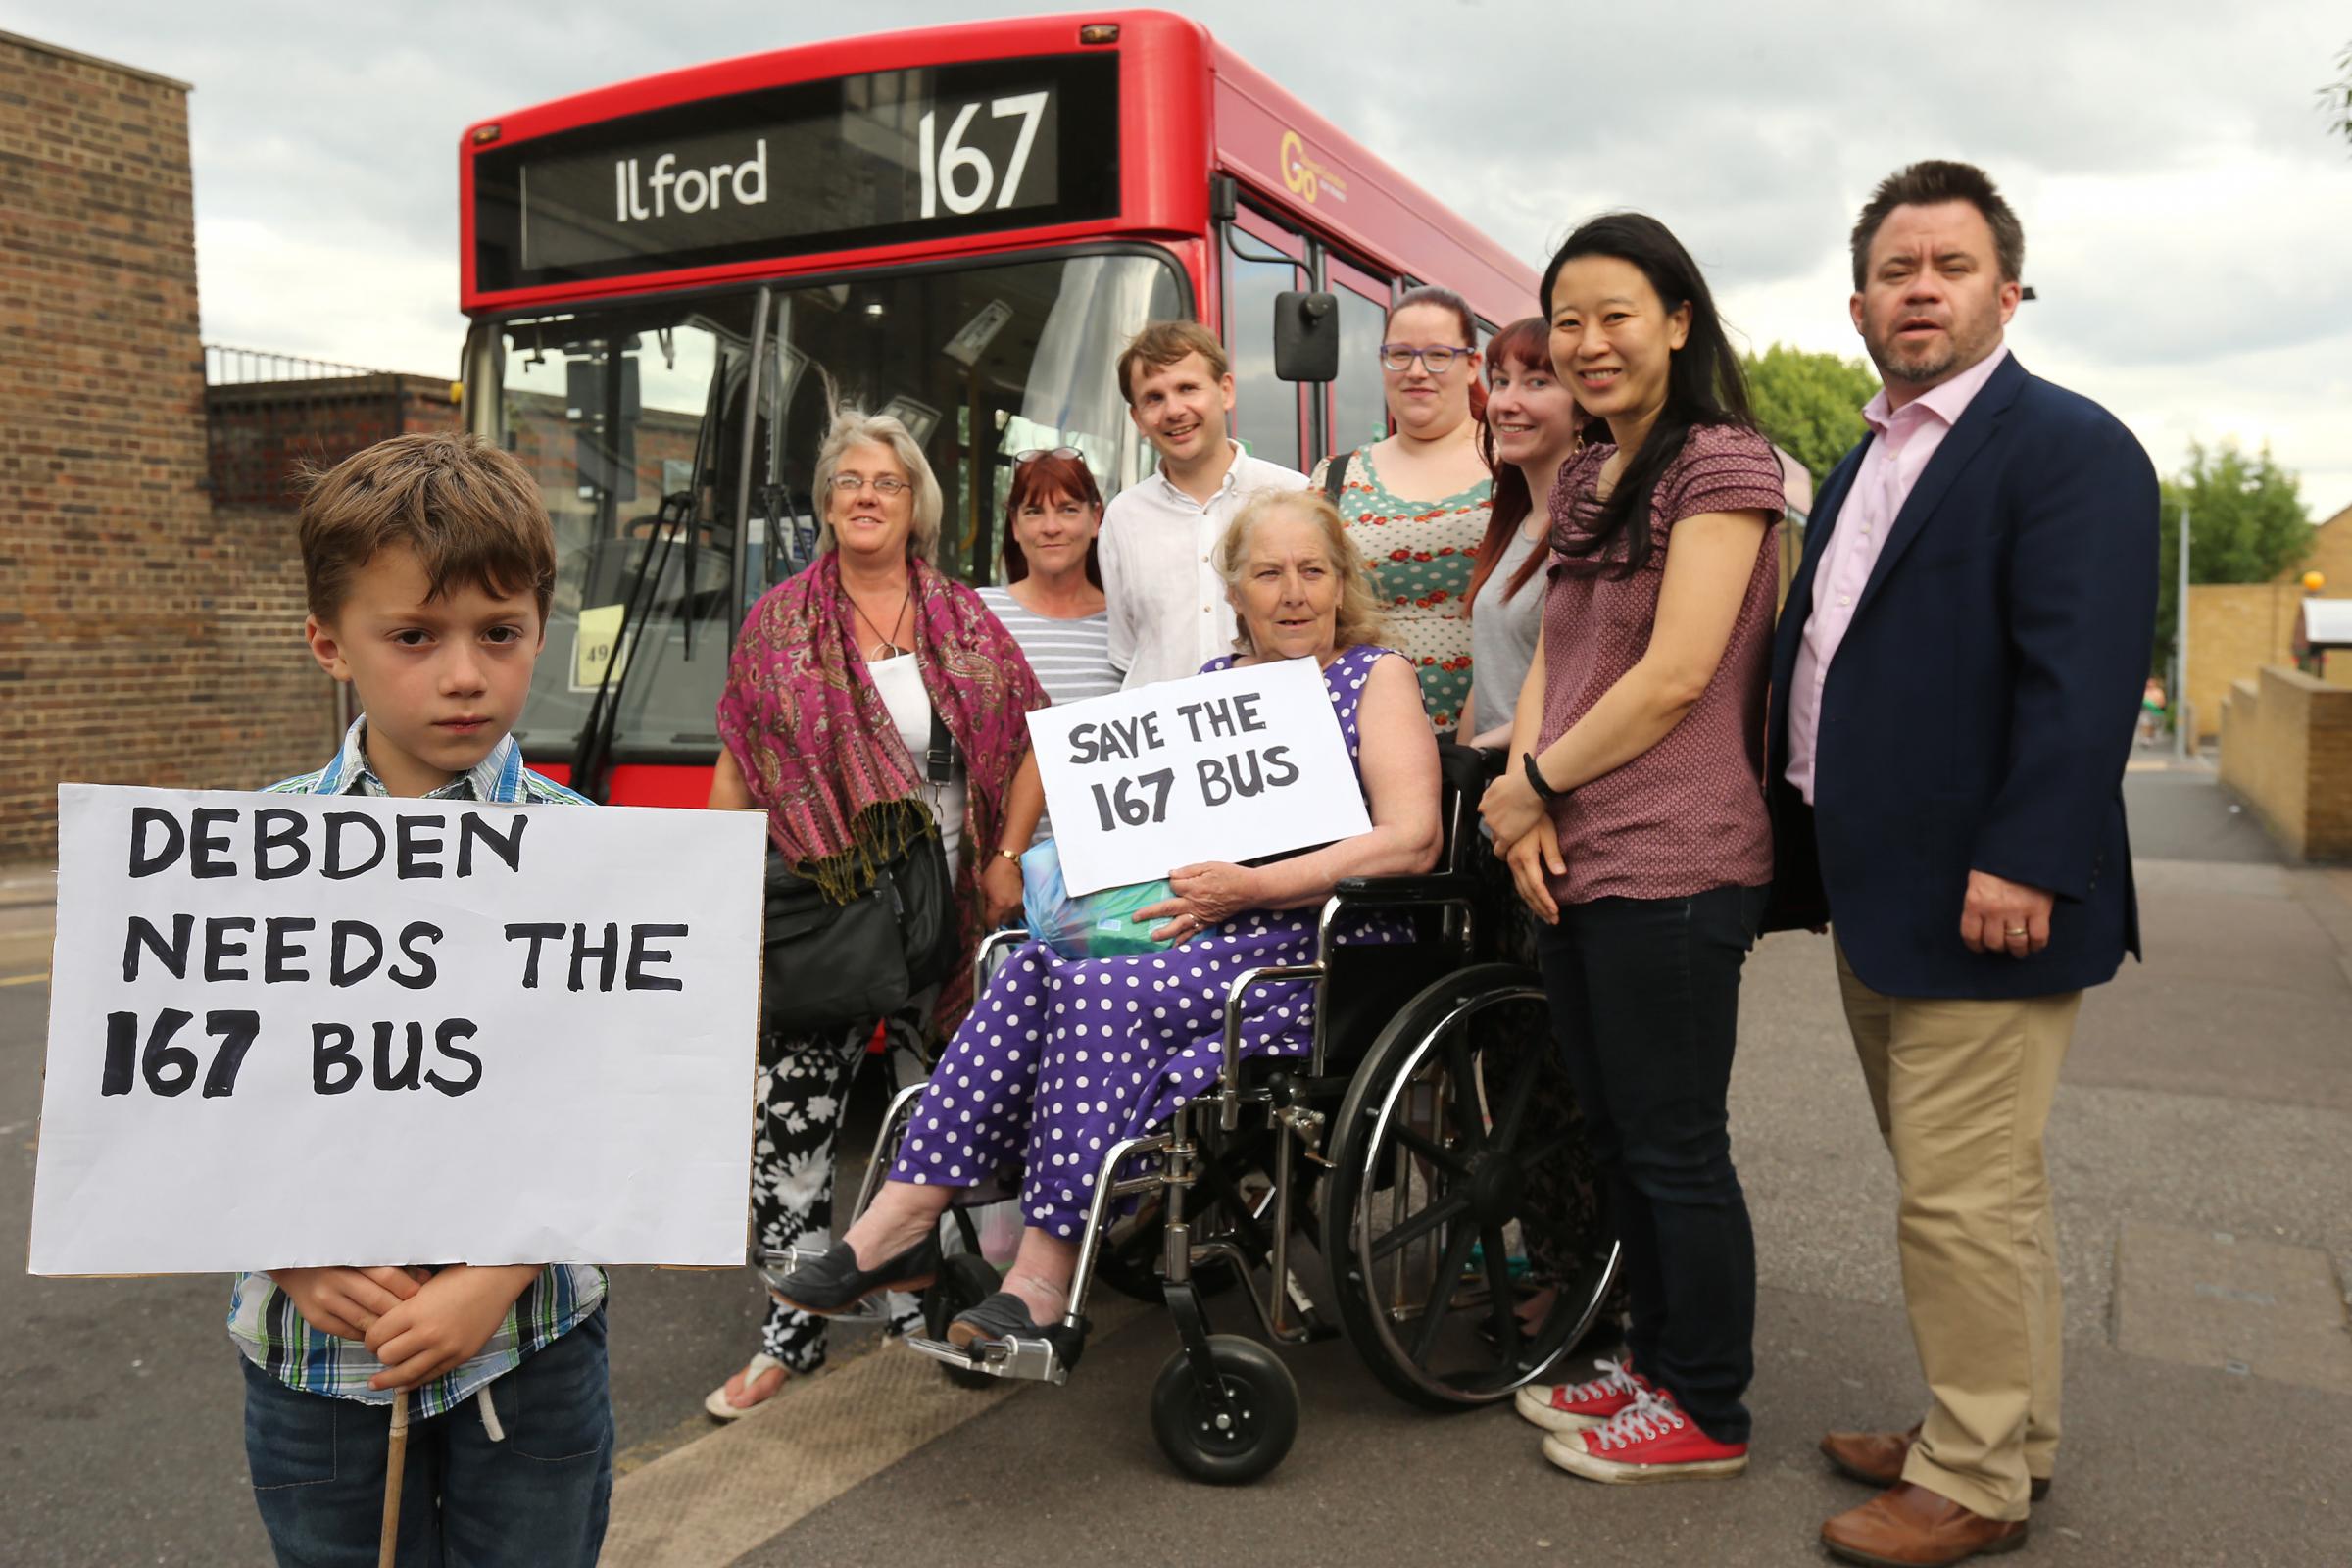 Thousands sign petition against 'lifeline' bus cut - Epping Forest Guardian